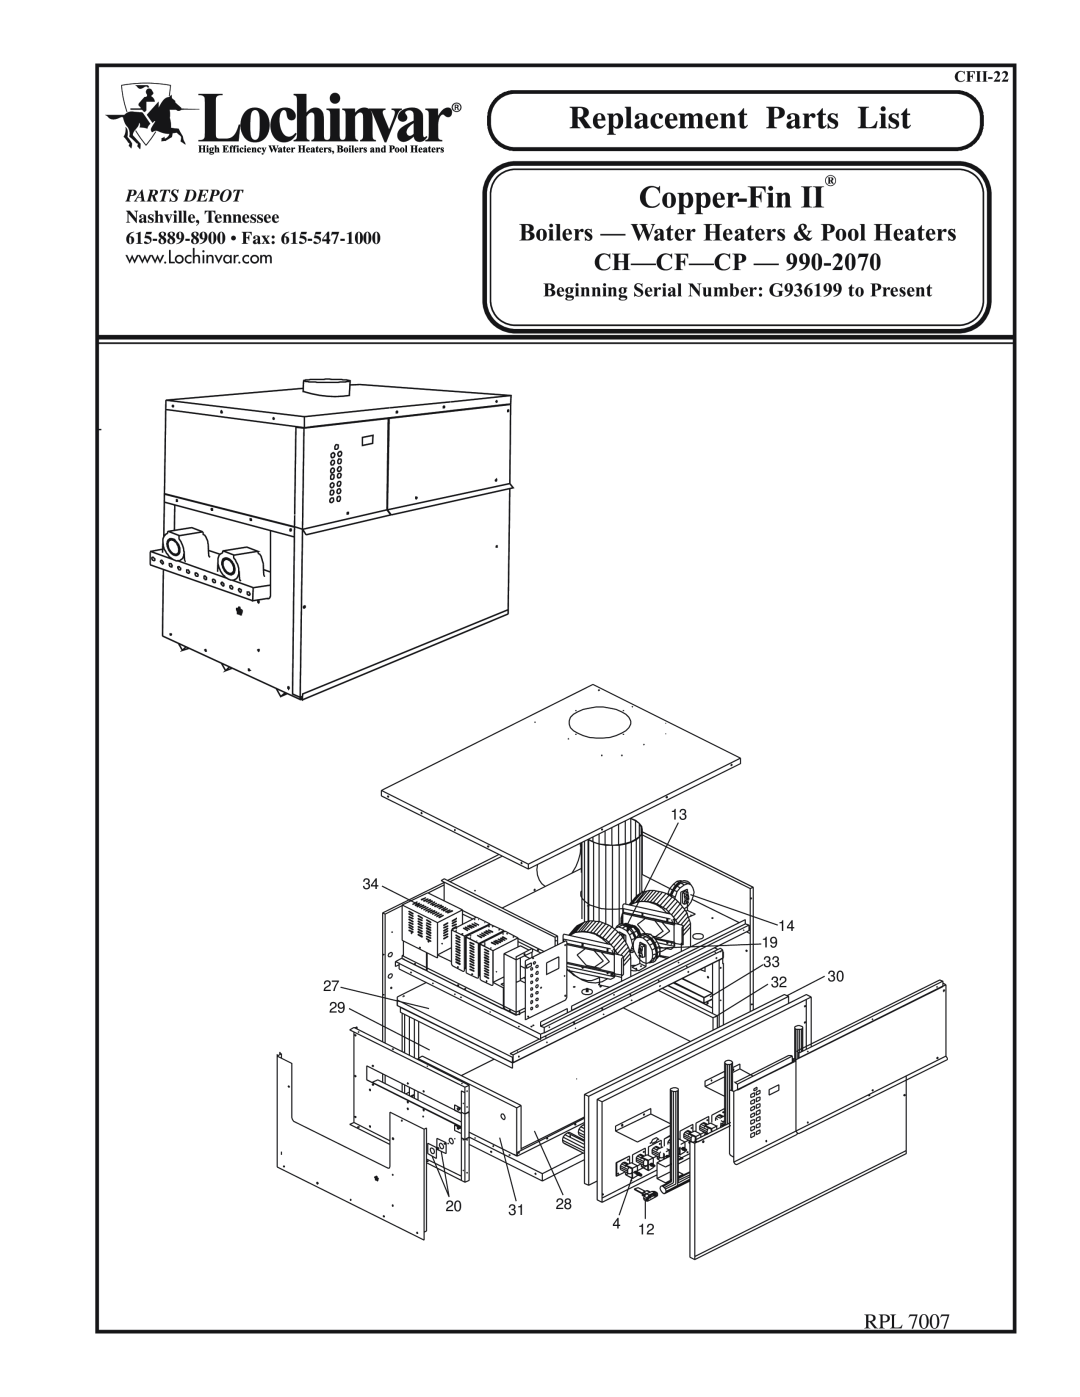 Lochinvar G936199 manual Replacement Parts, List, Copper-Fin, Boilers - Water Heaters & Pool Heaters, Ch-Cf-Cp, CFII-22 